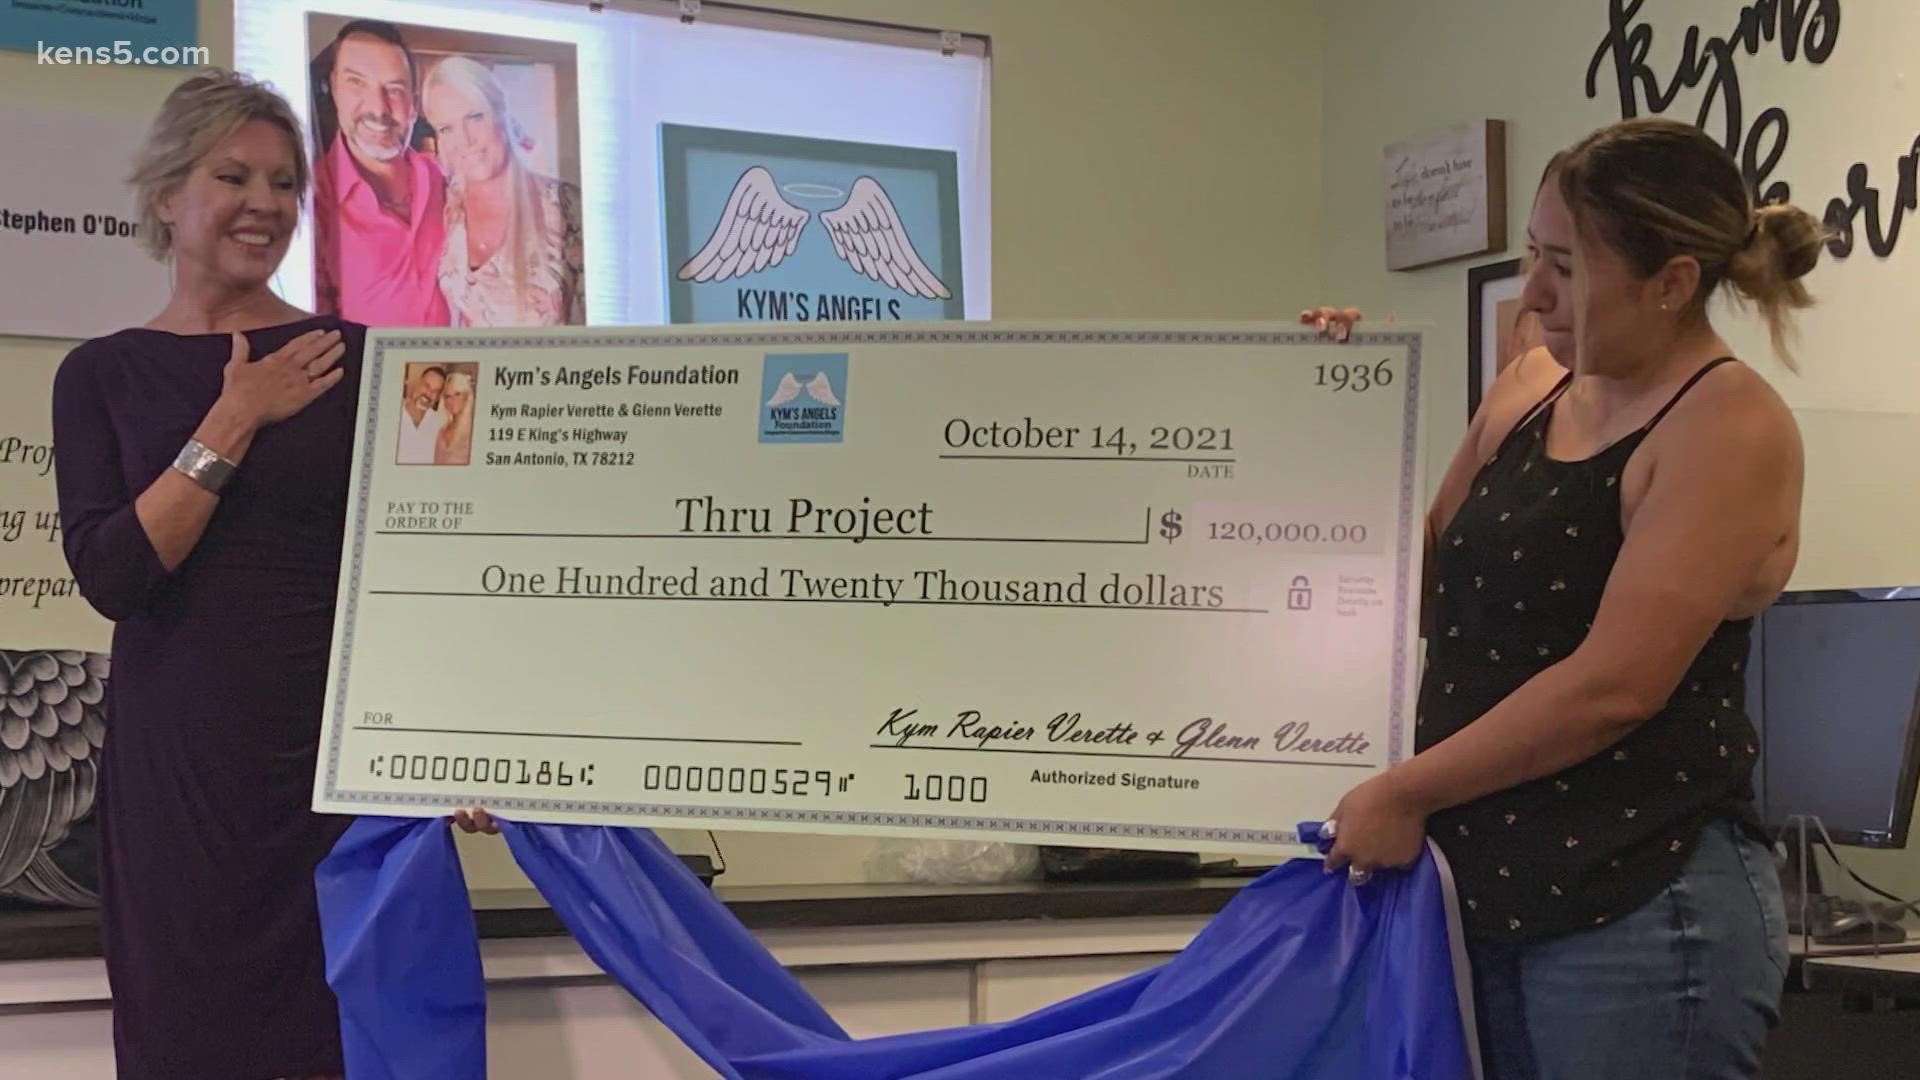 The Kym's Angels Foundation received $120,000 to continue helping local teens and families in south Texas.